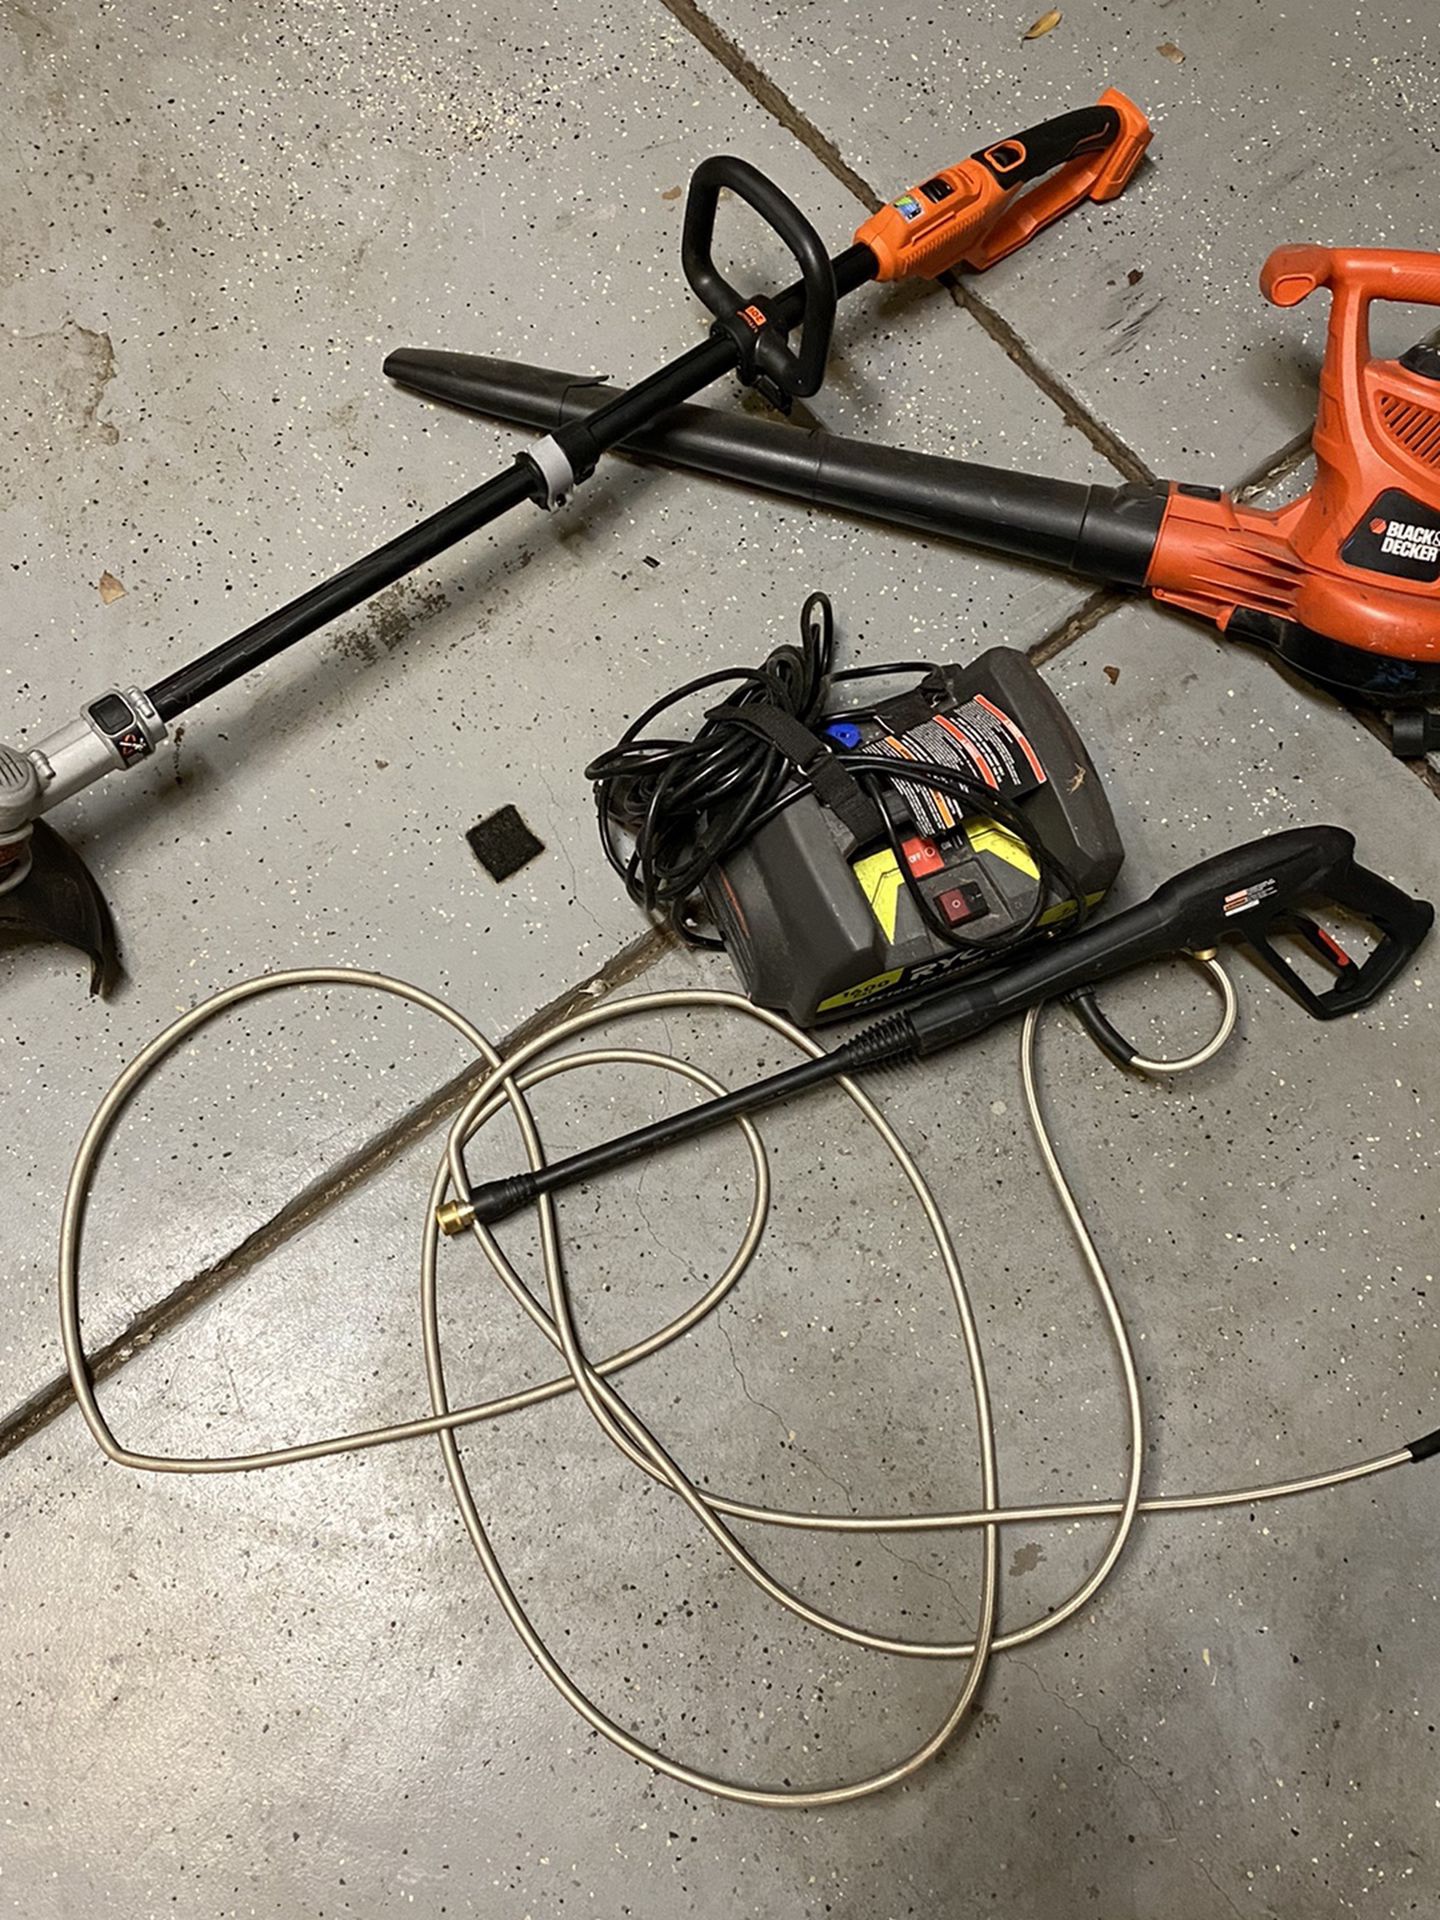 Electric Pressure Washer, Leaf Blower And Weed eater